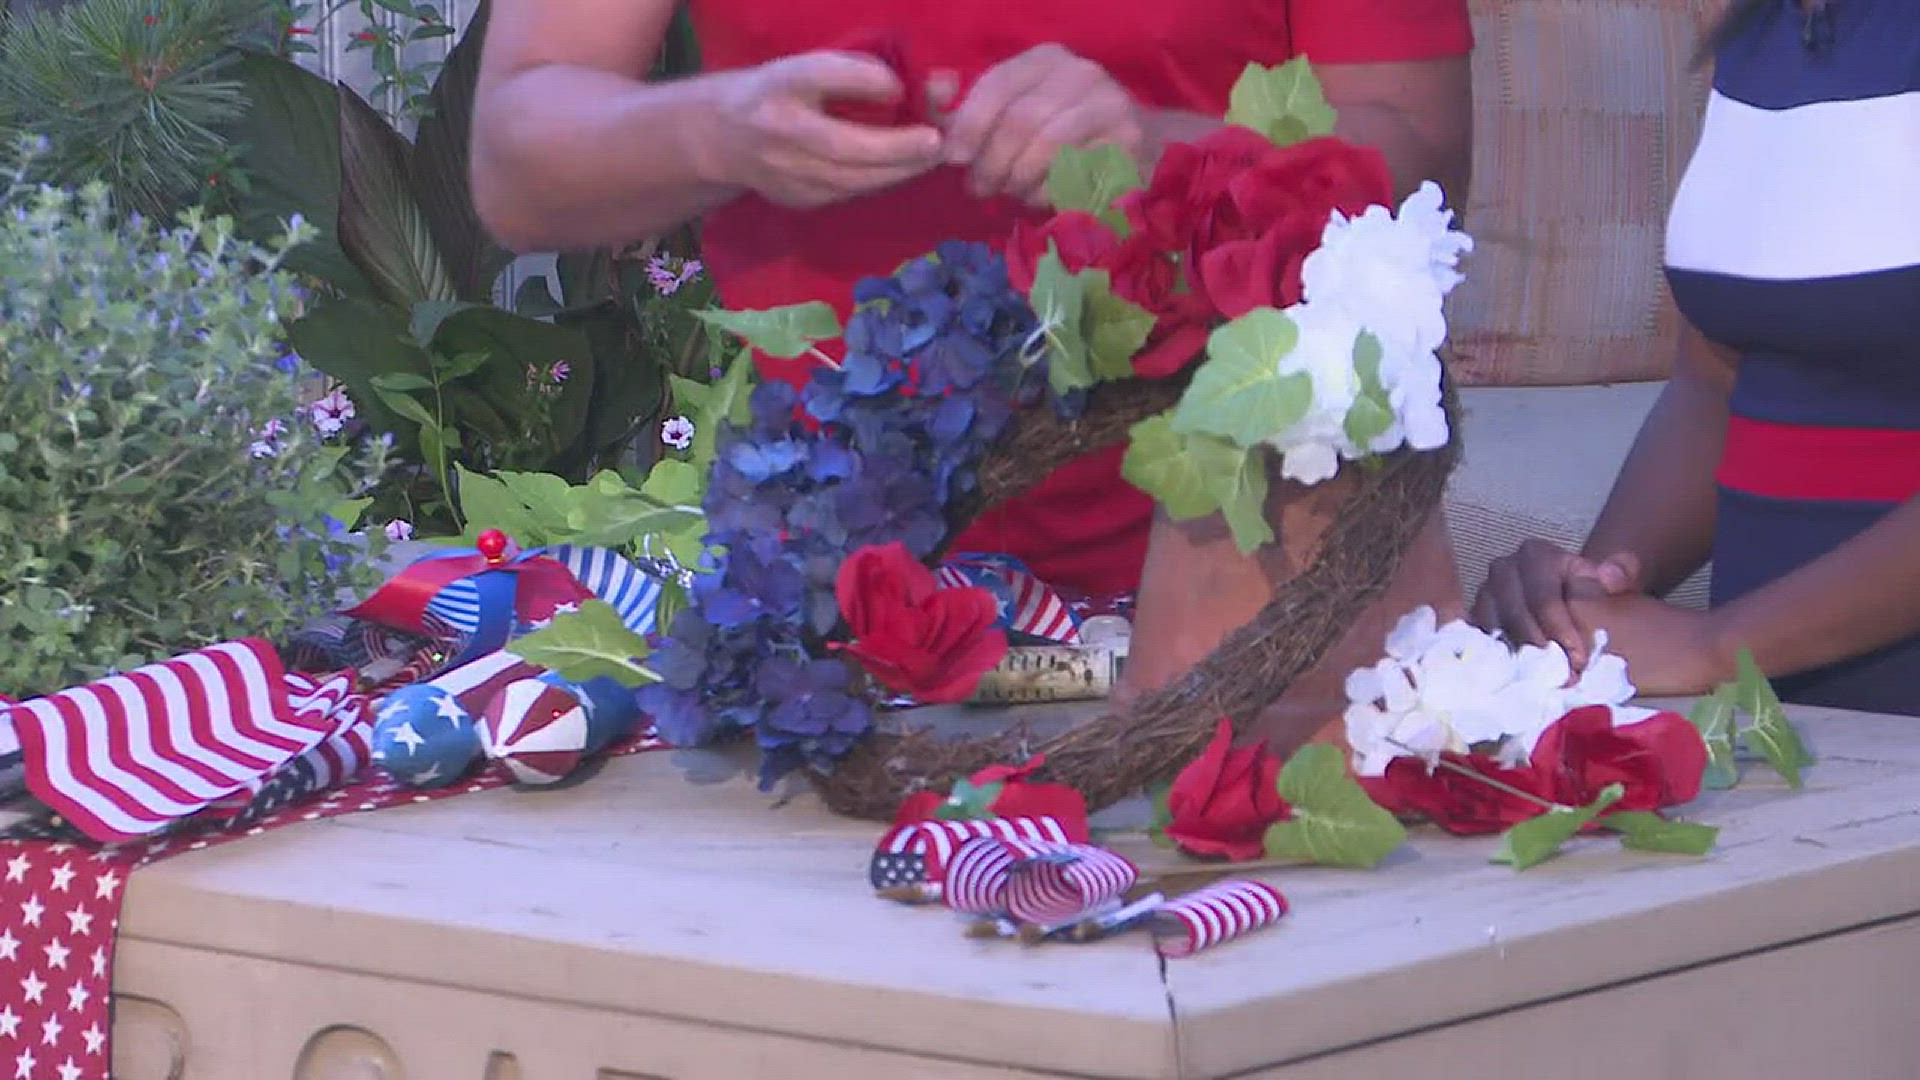 Lifestyle expert Chris H. Olsen joined THV11 This Morning to show us how to make a red, white, and blue floral wreath.